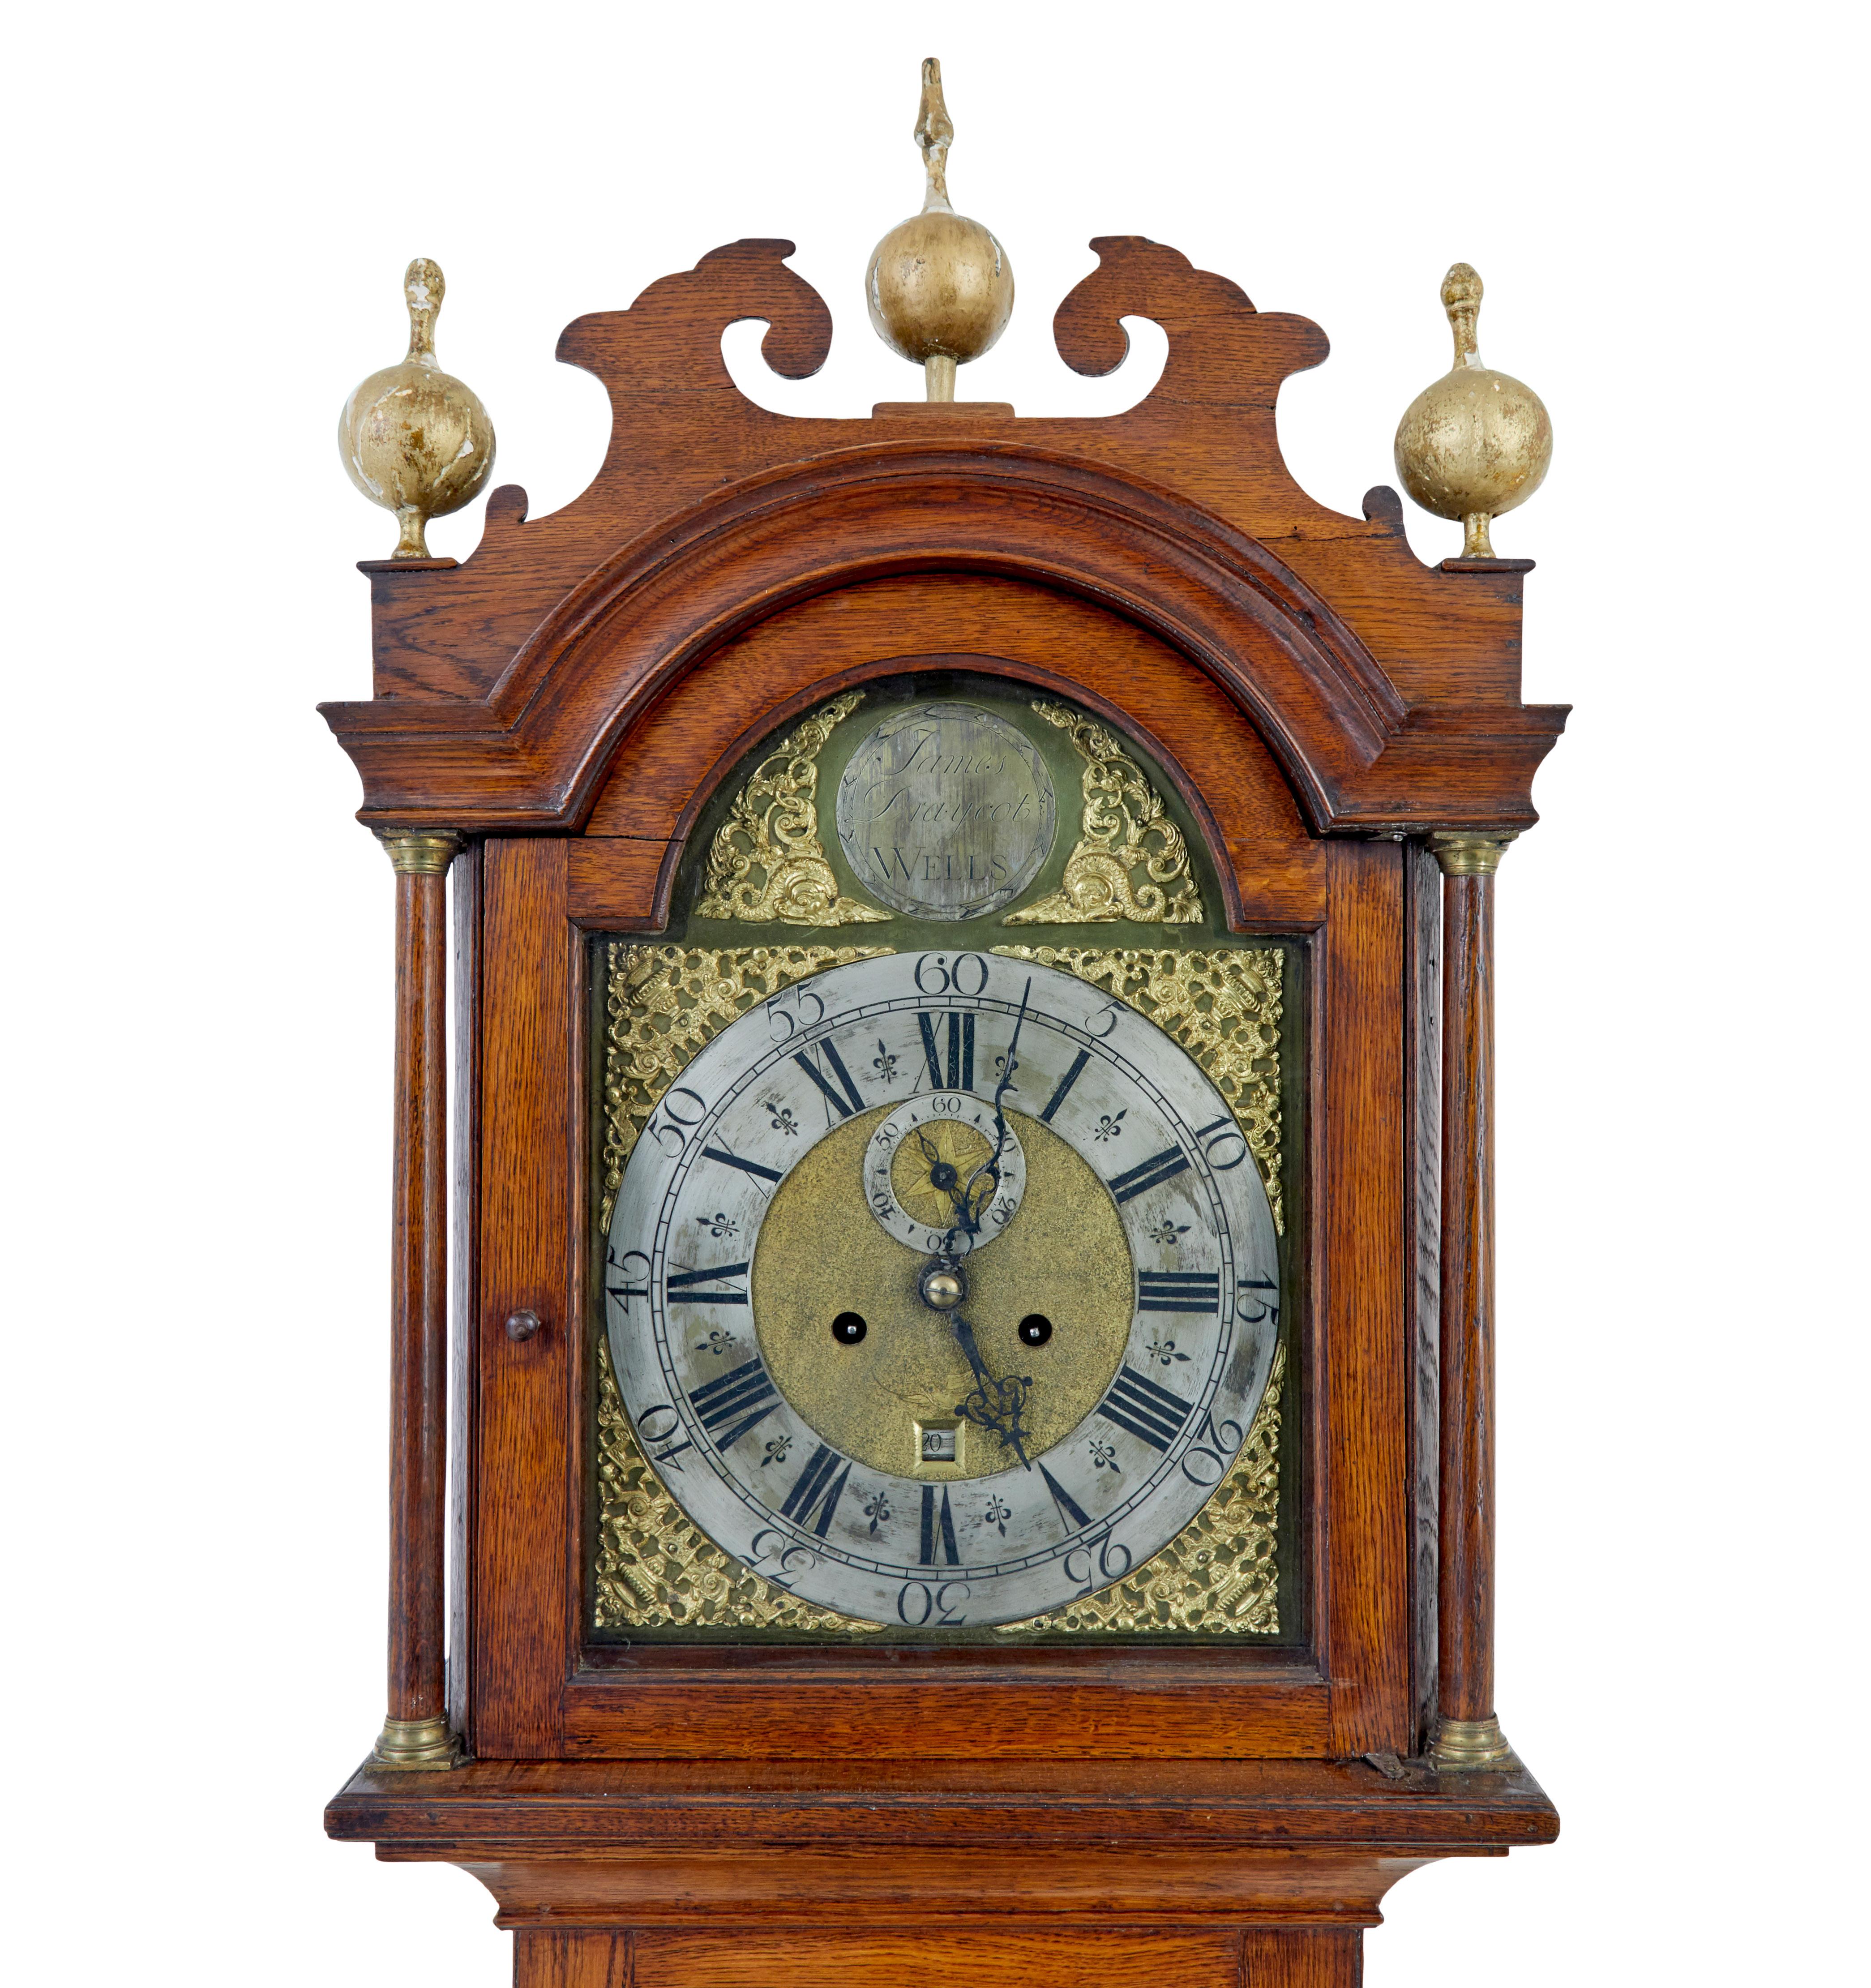 18th century oak longcase clock by James Draycot  In Good Condition For Sale In Debenham, Suffolk